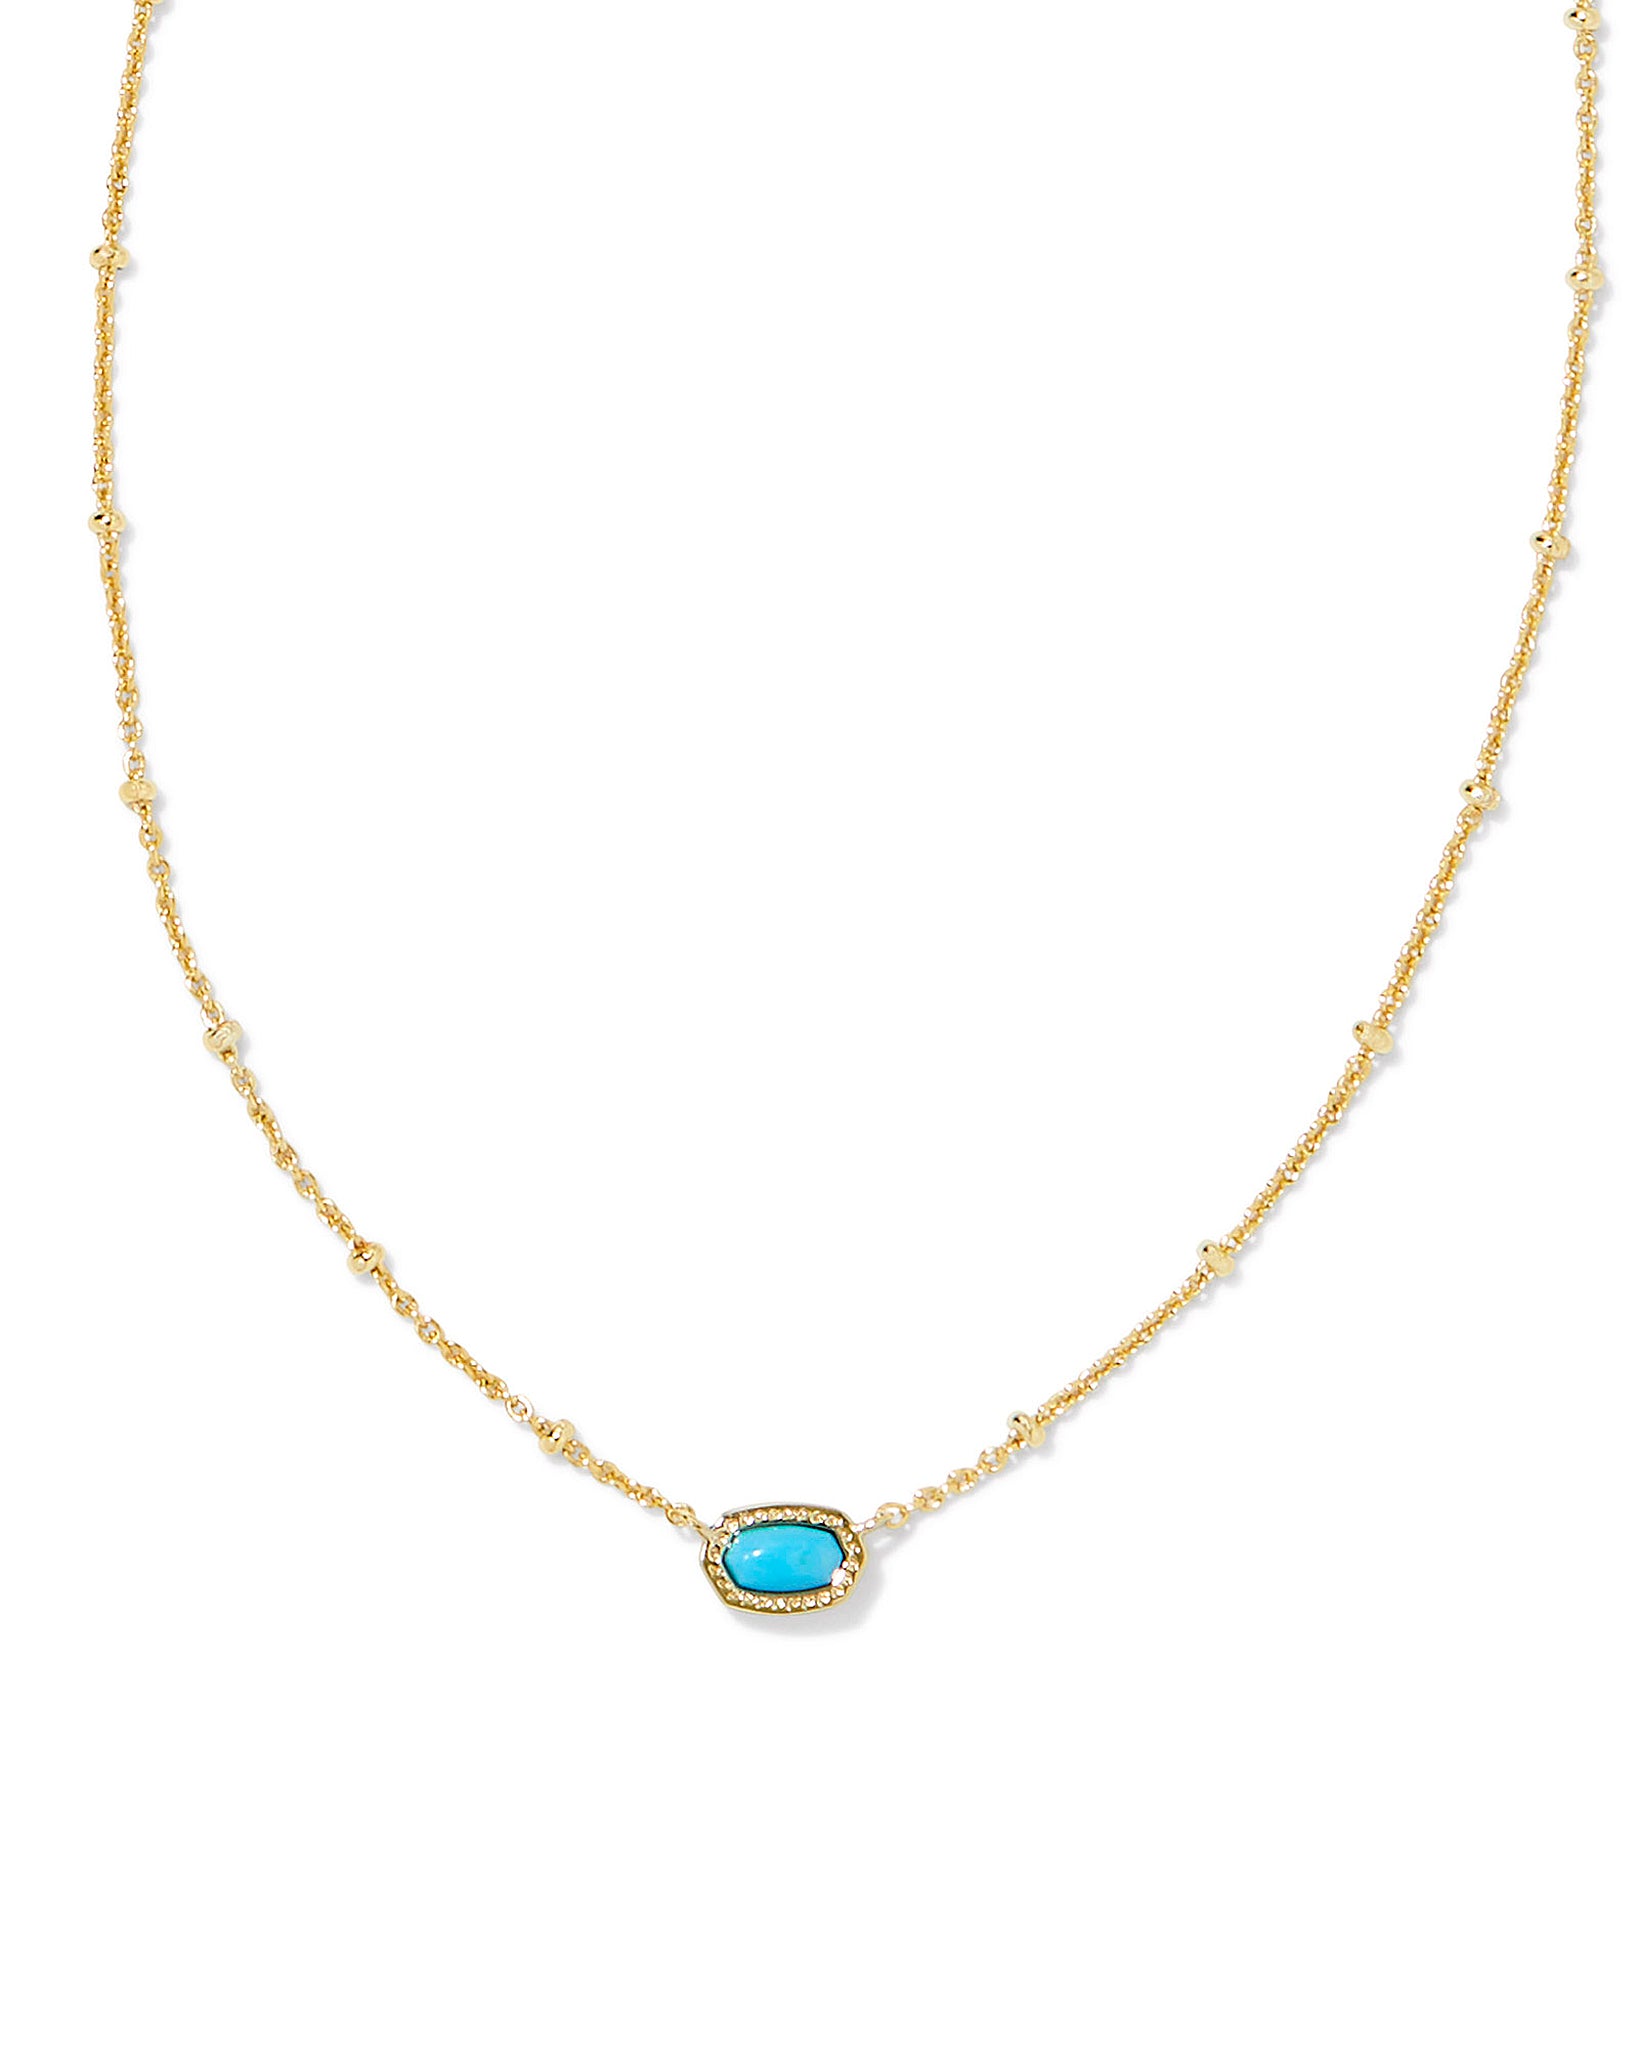 Kendra Scott Mini Elisa Oval Satellite Chain Pendant Necklace in Turquoise Blue Magnesite and Gold